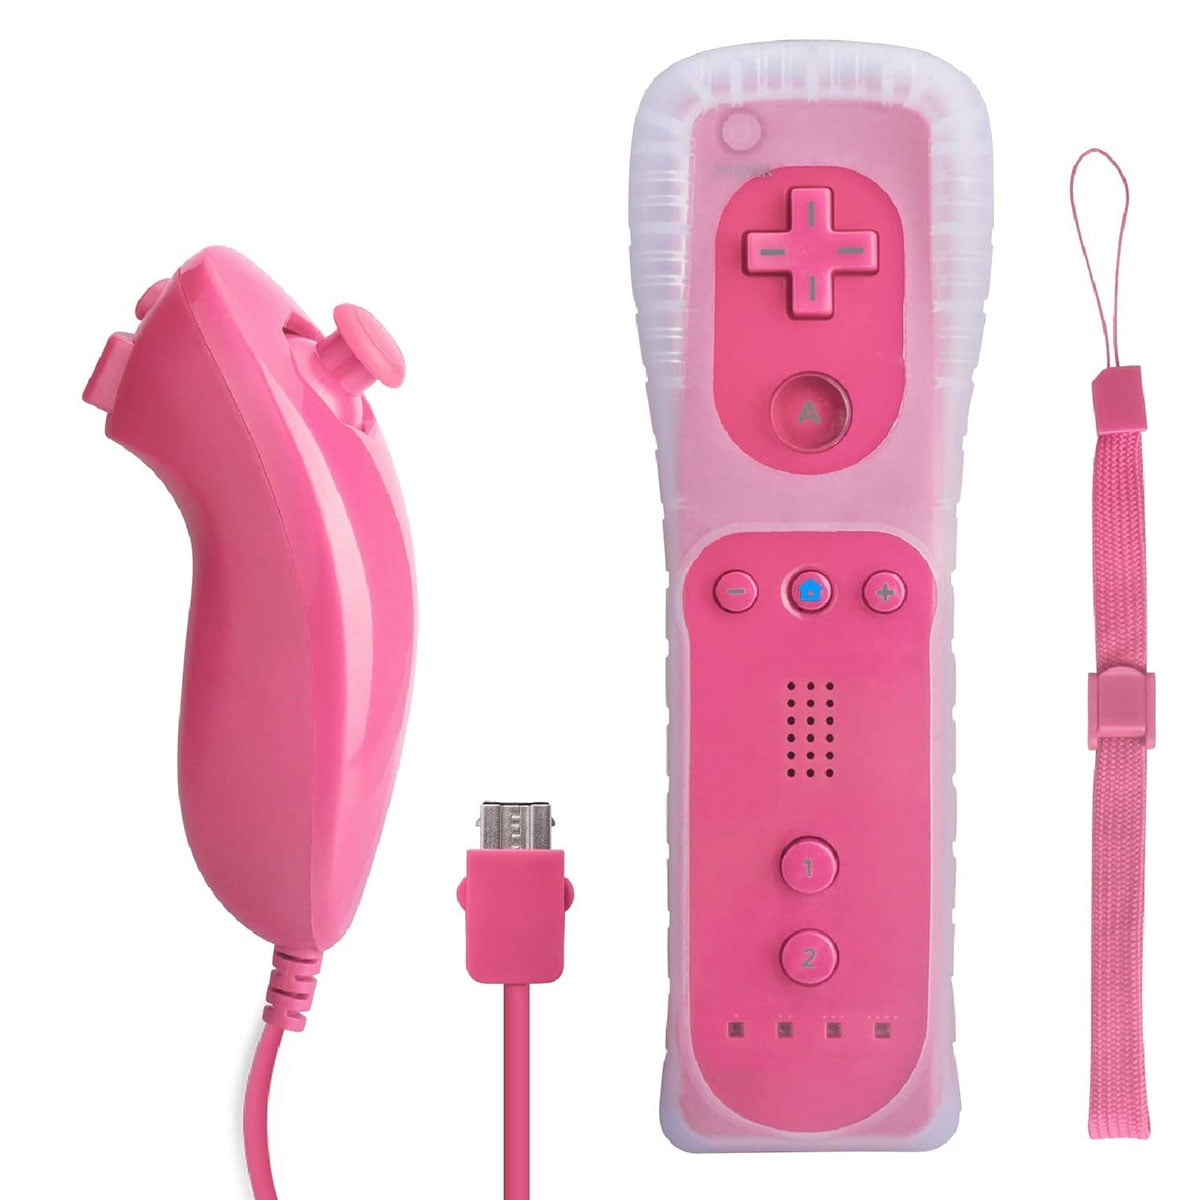 dialect 鍔 Dialoog 1 Pcs Wii Remote with Built-in Motion Plus and Nunchuk, Compatible with Nintendo  Wii, Wii U (Pink) - Walmart.com